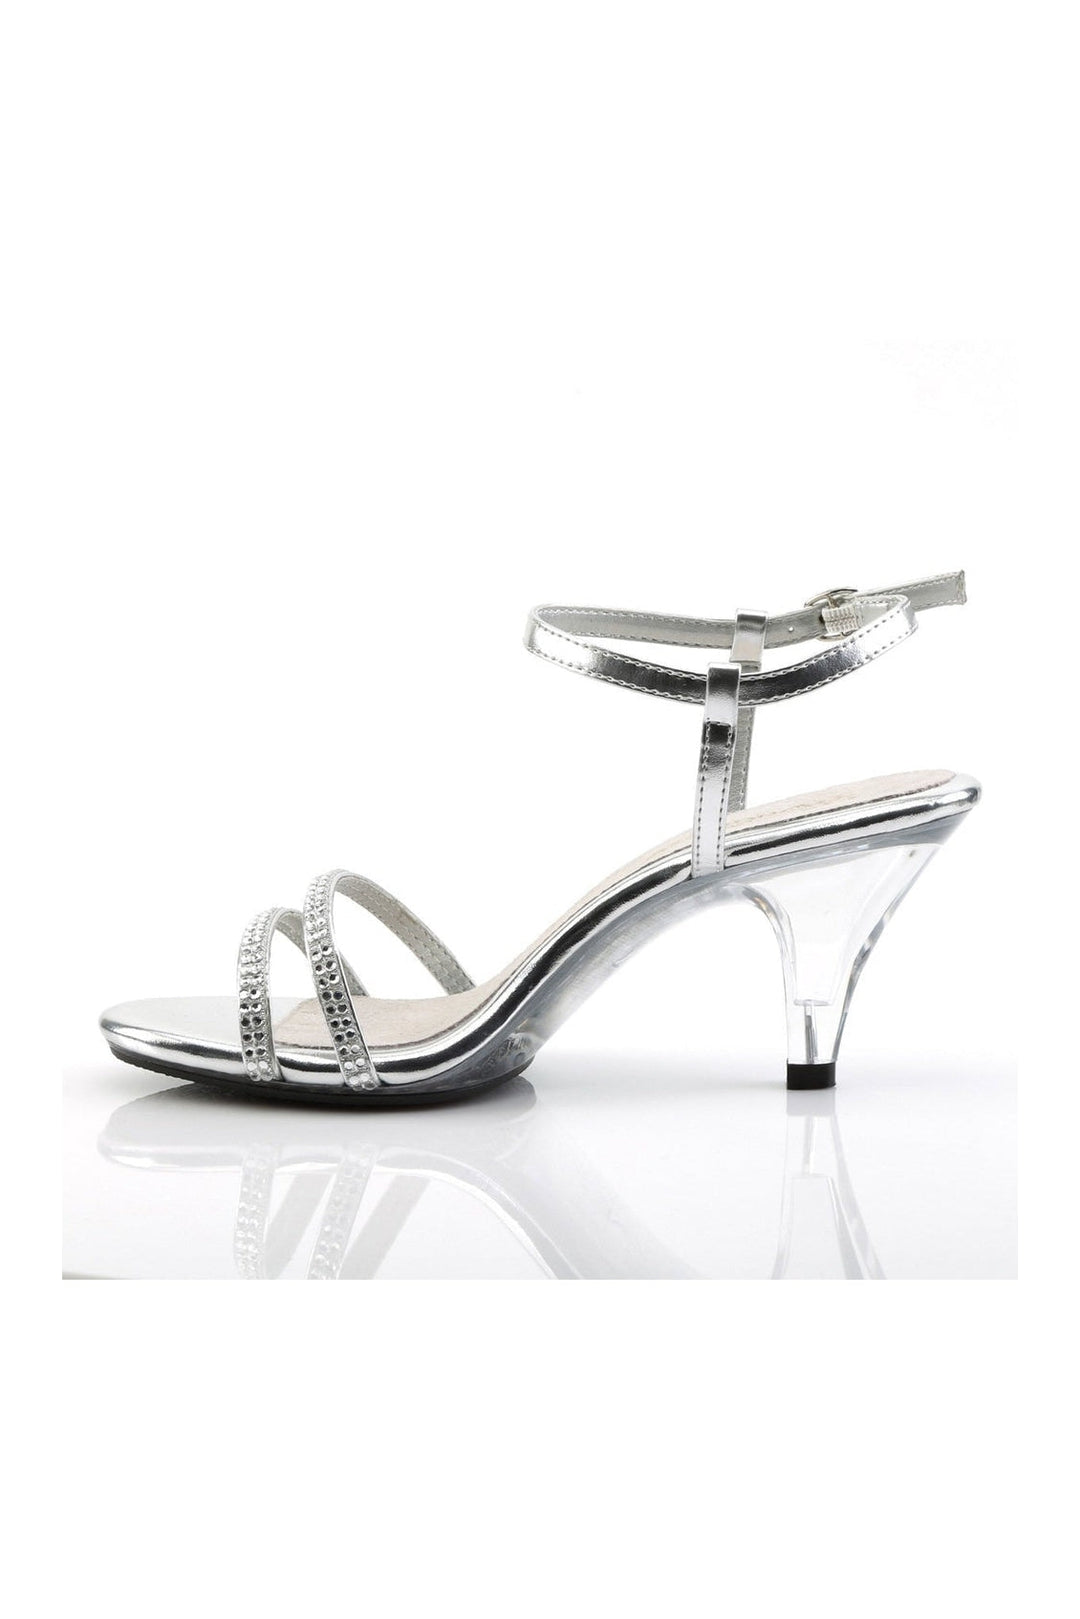 BELLE-316 Sandal | Clear Faux Leather-Fabulicious-Sandals-SEXYSHOES.COM